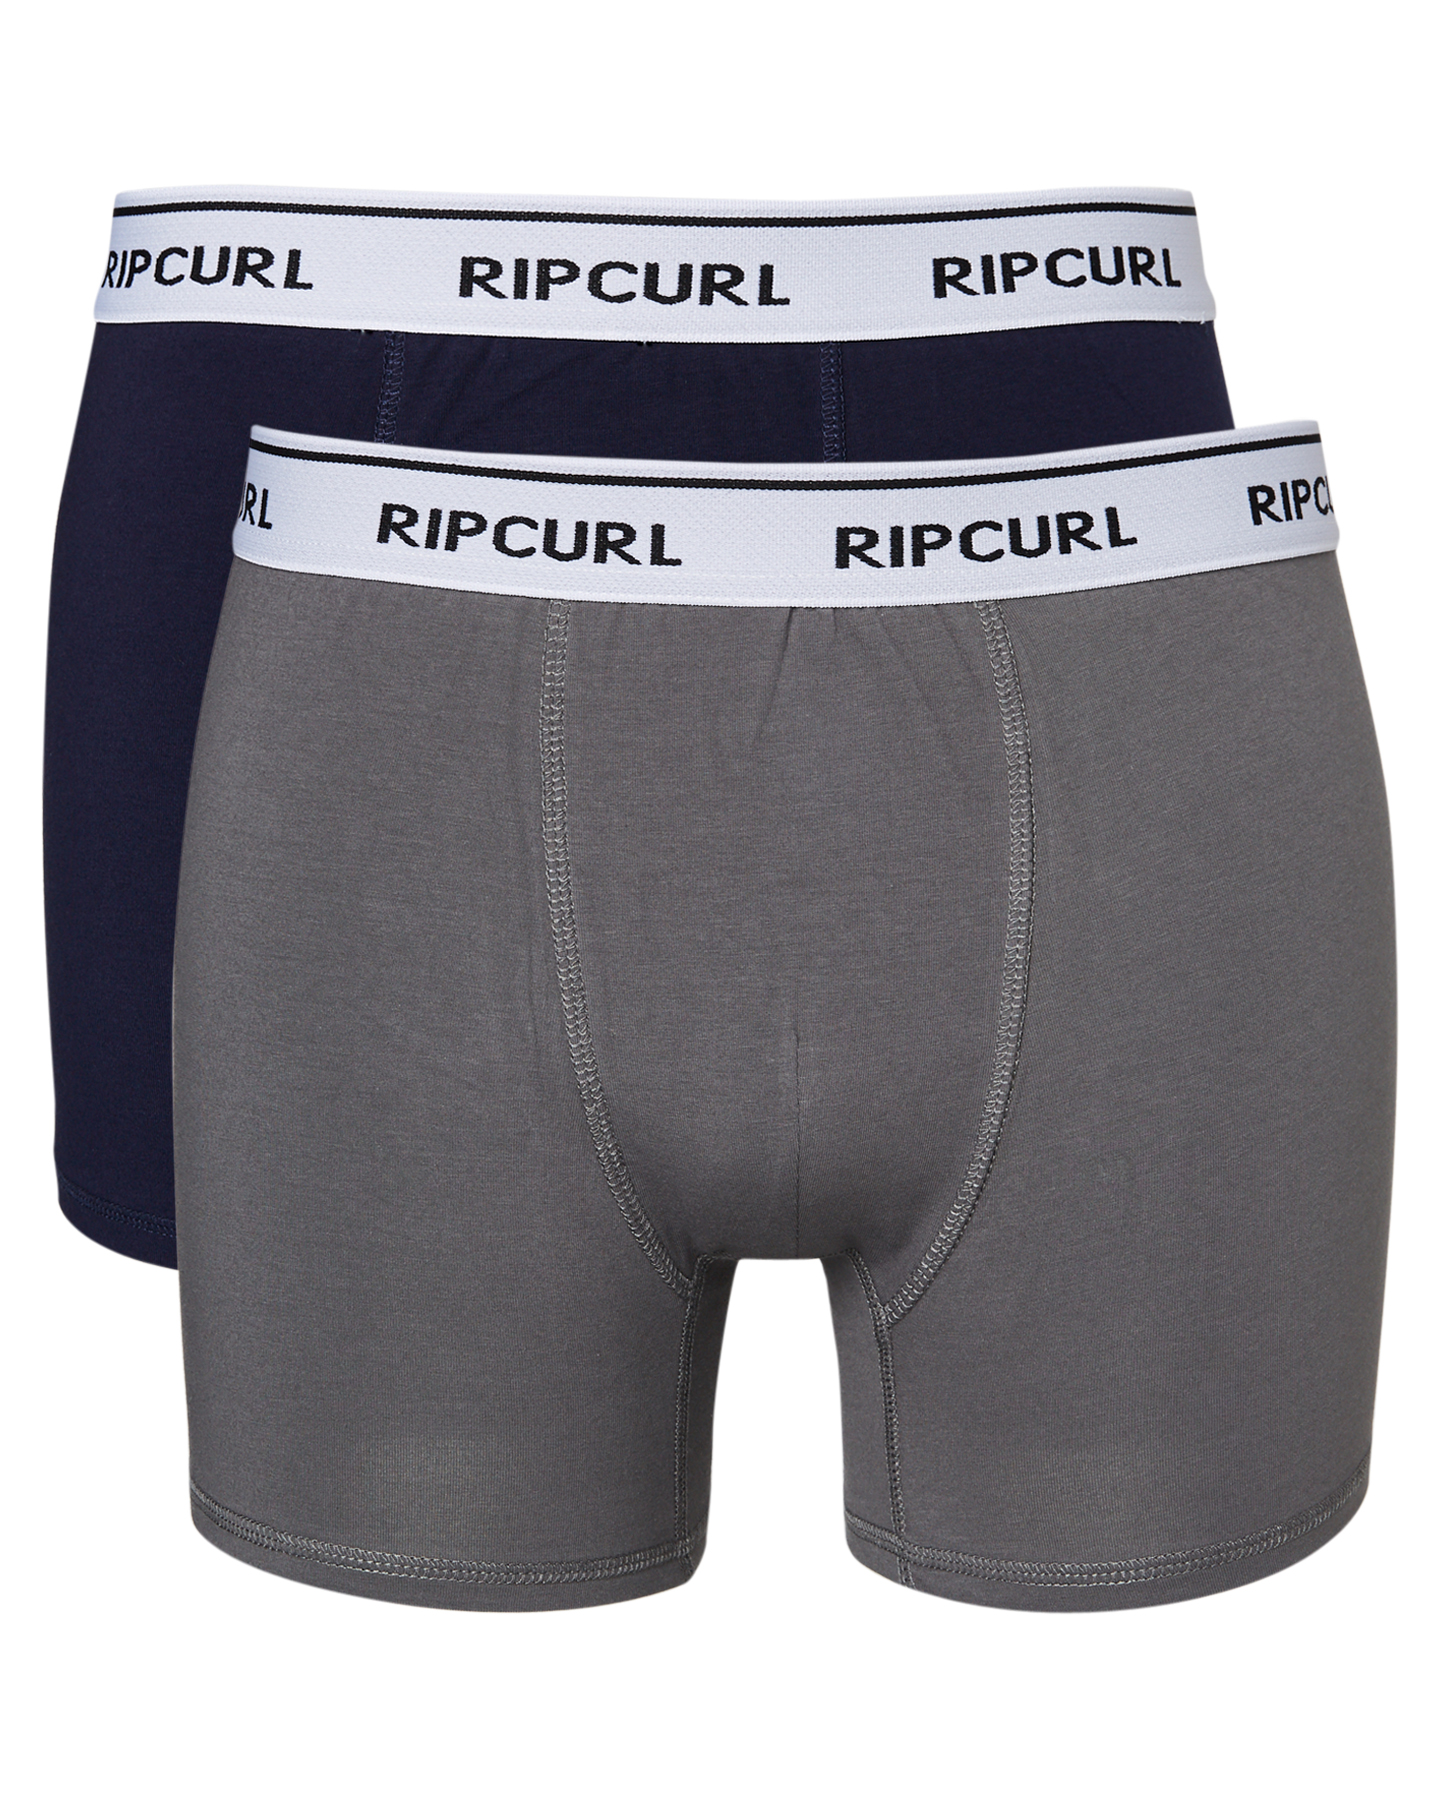 Rip Curl Ripcurl Boxer 2 Pack - Navy | SurfStitch